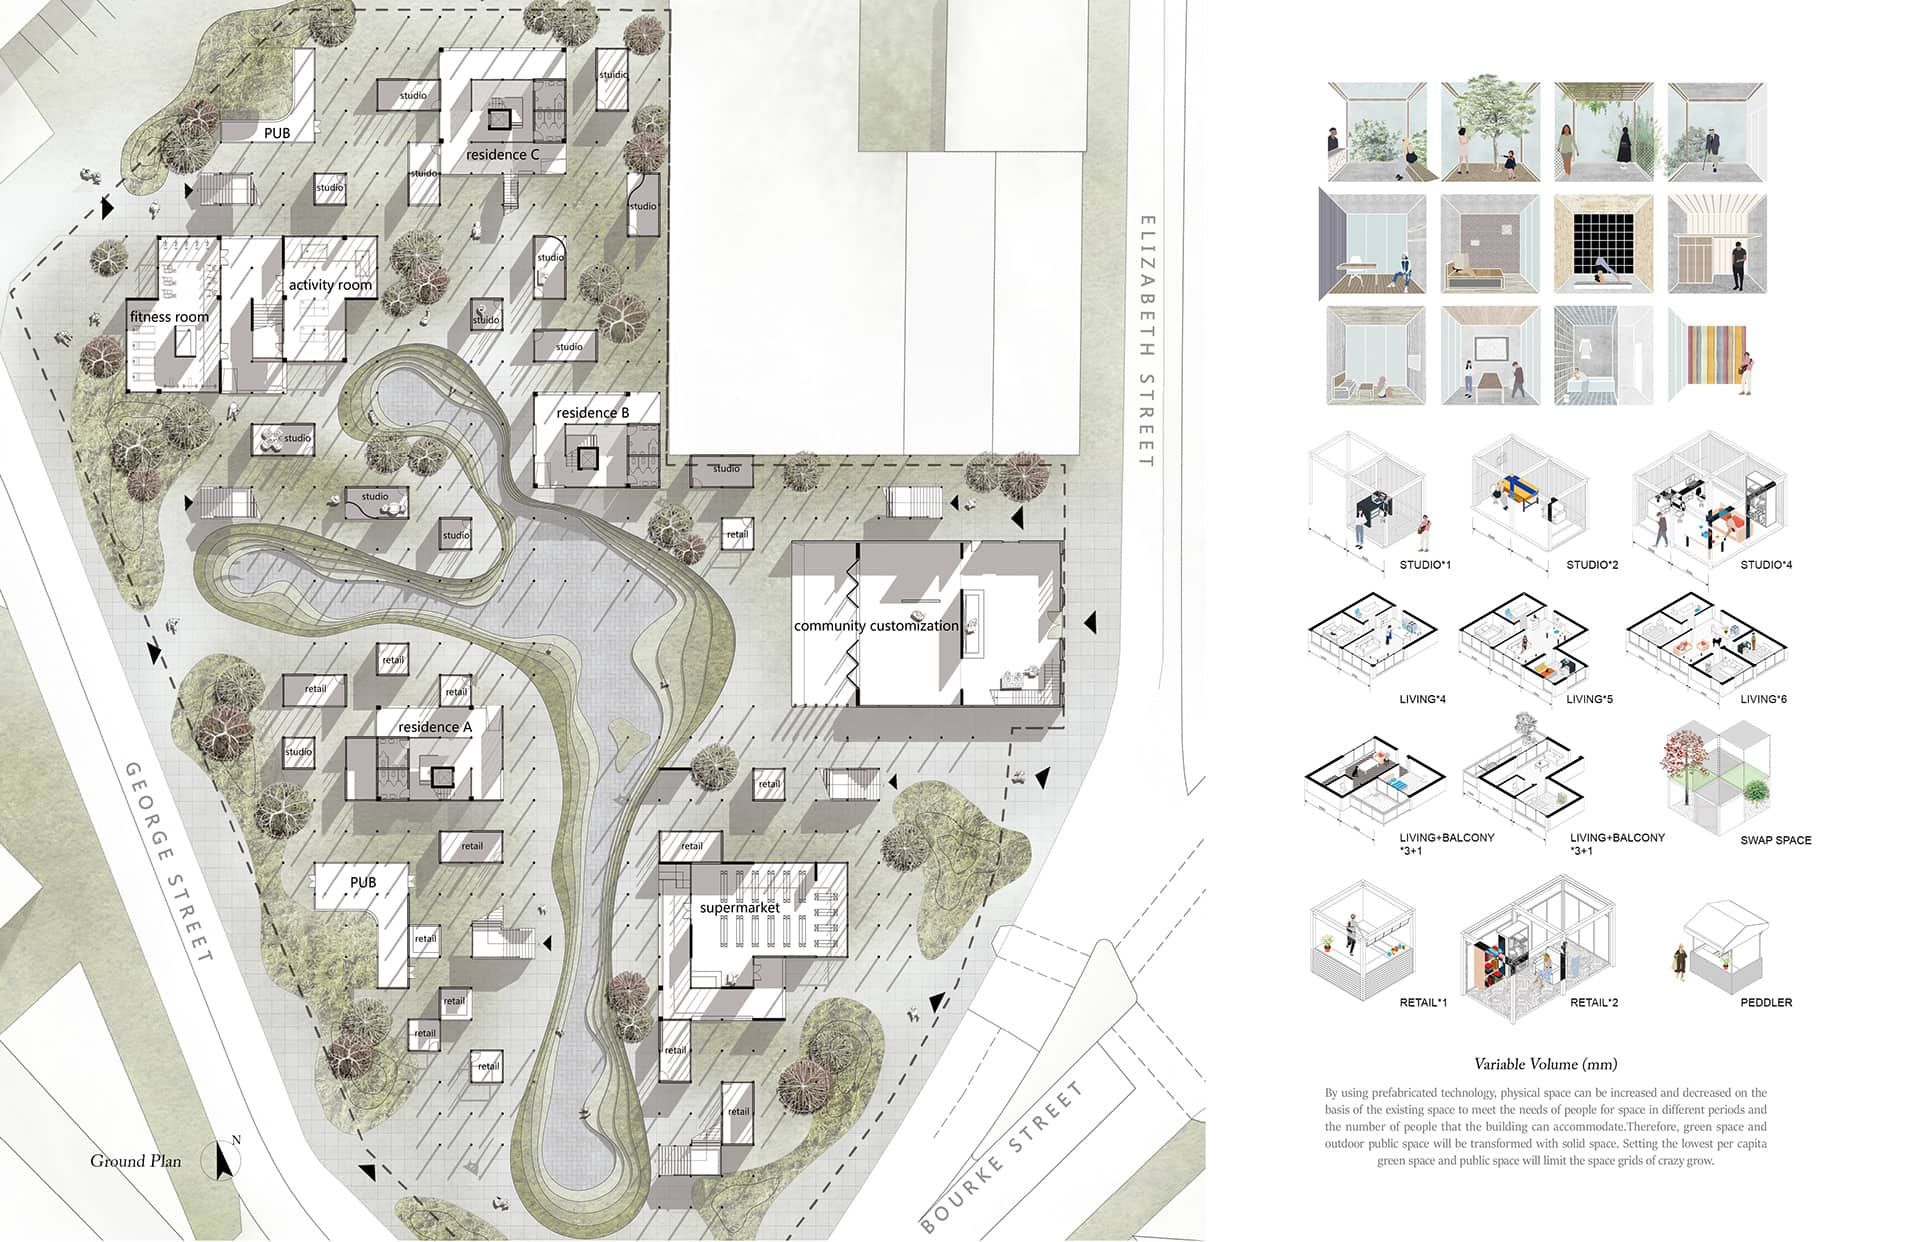 Composition of site plan on the left and volumetric space diagrams on the right